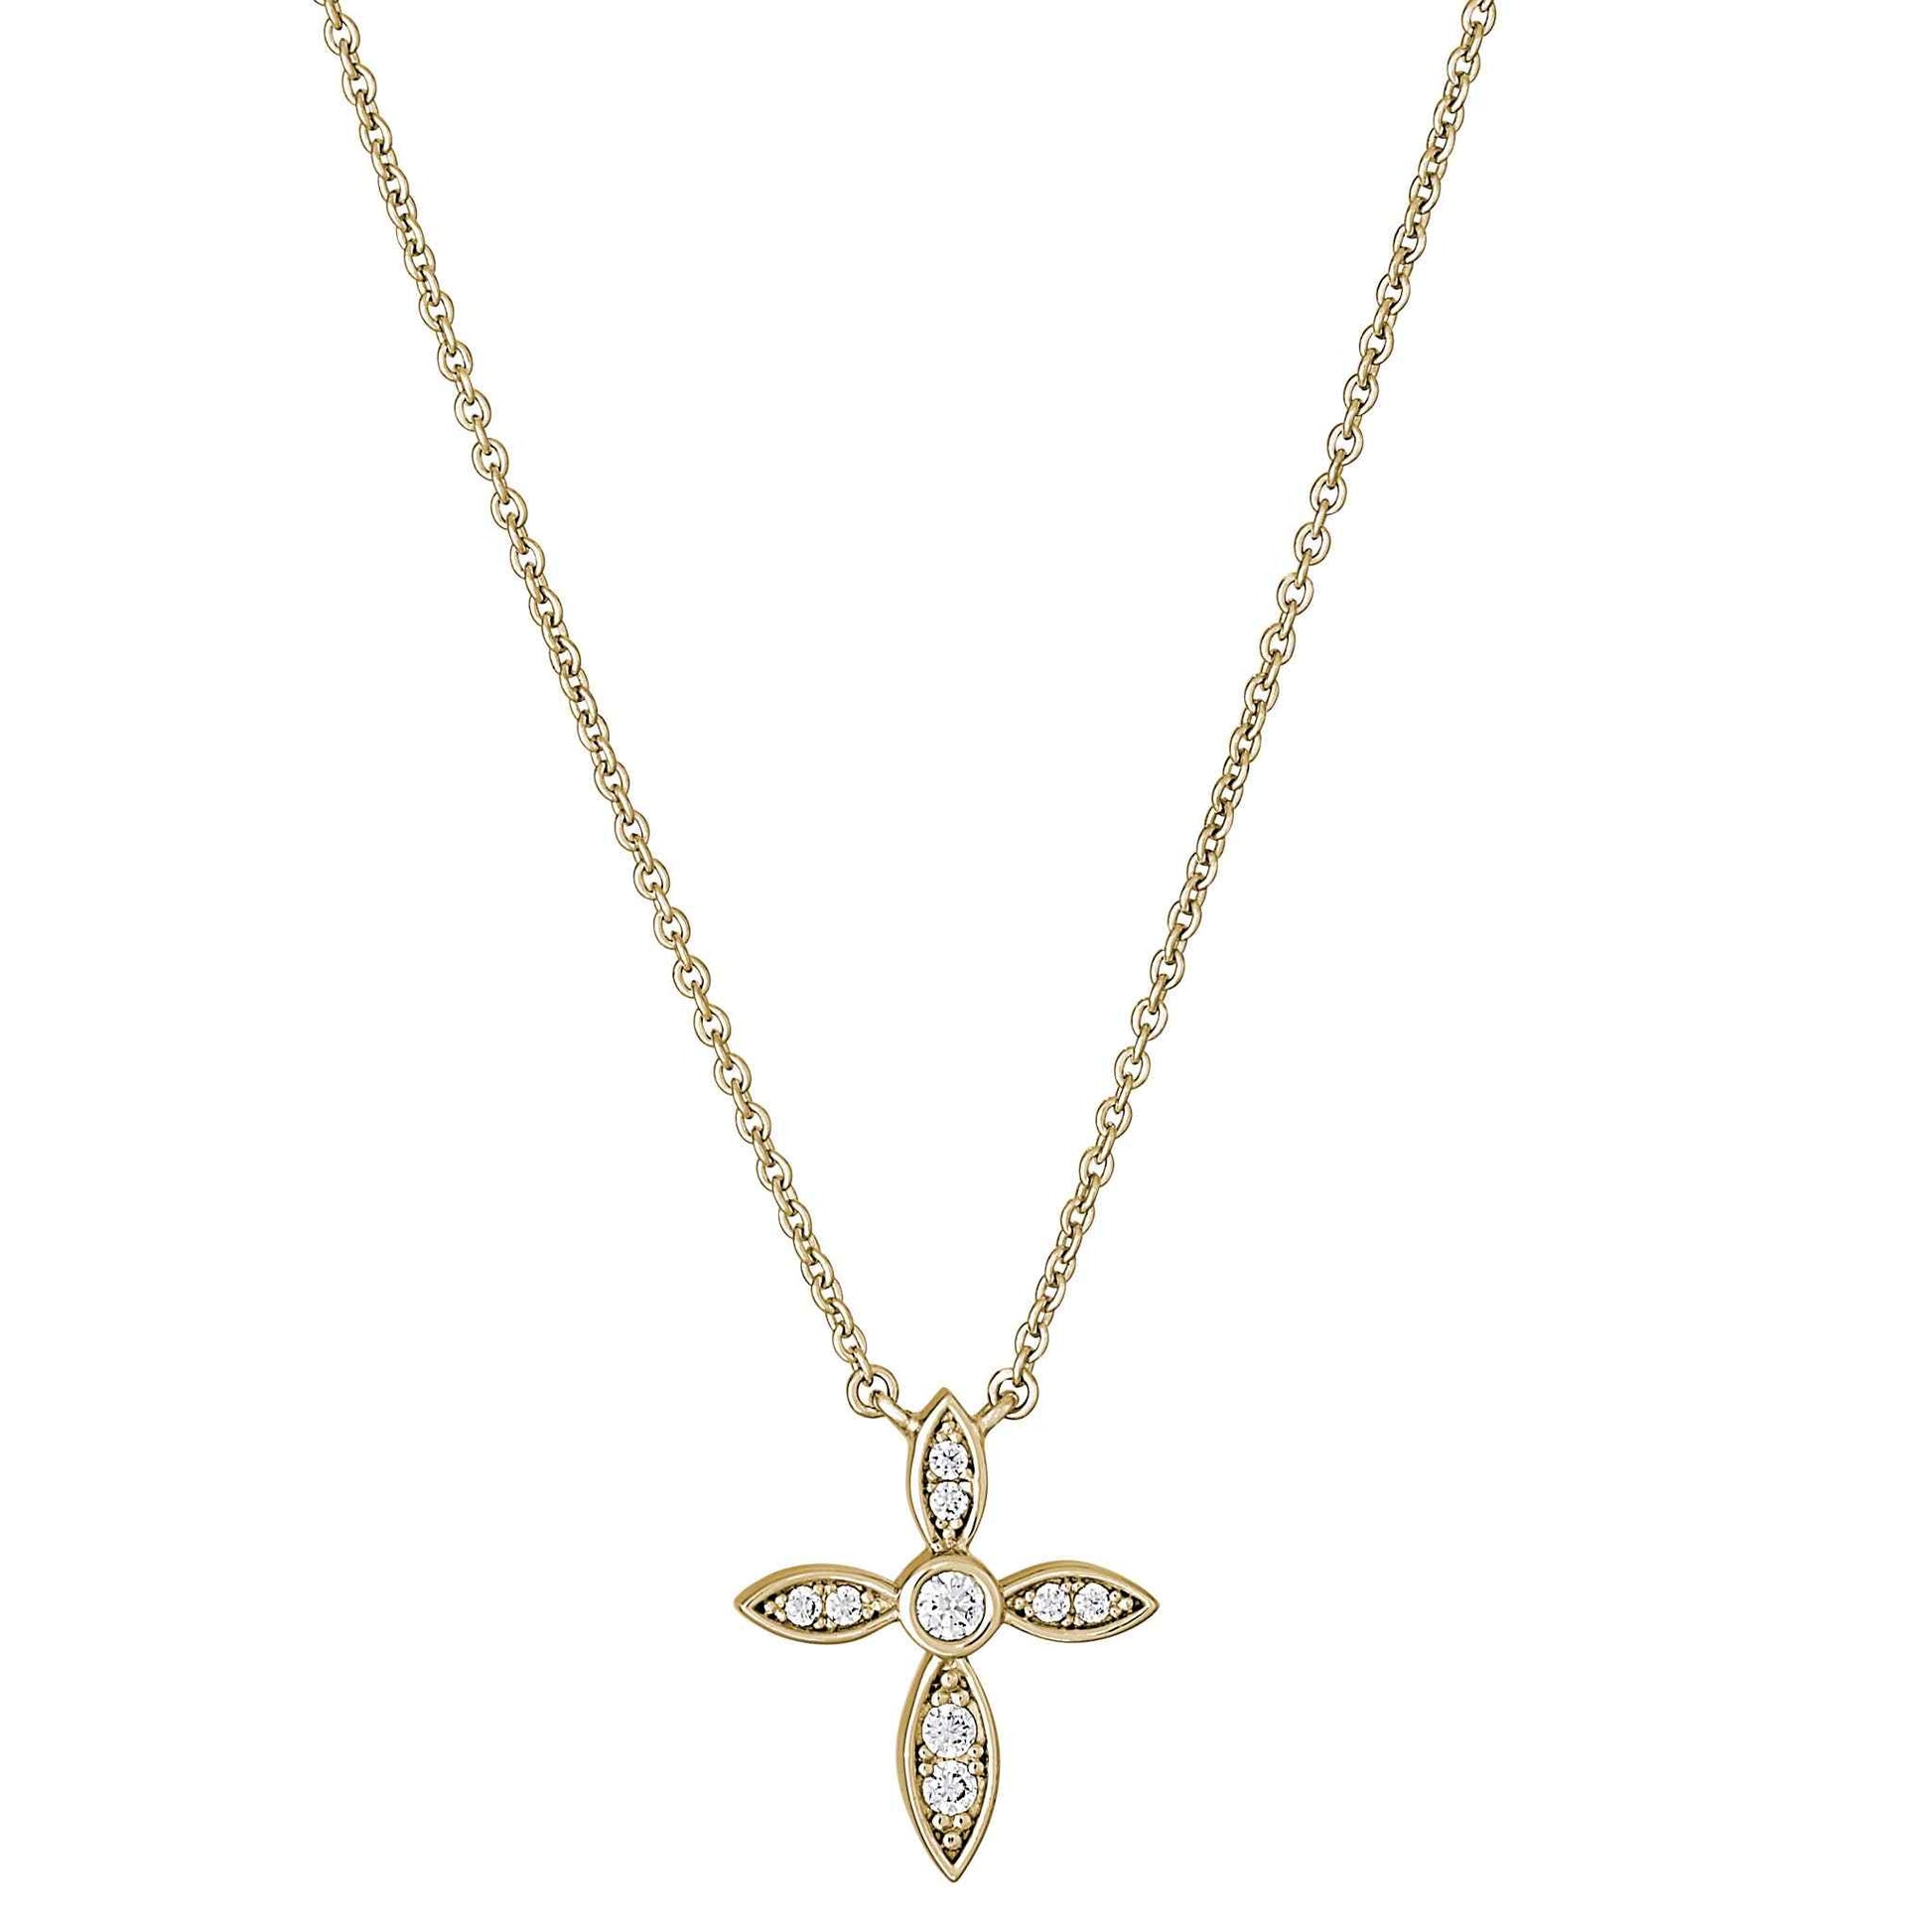 A marquise cross necklace with simulated diamonds displayed on a neutral white background.